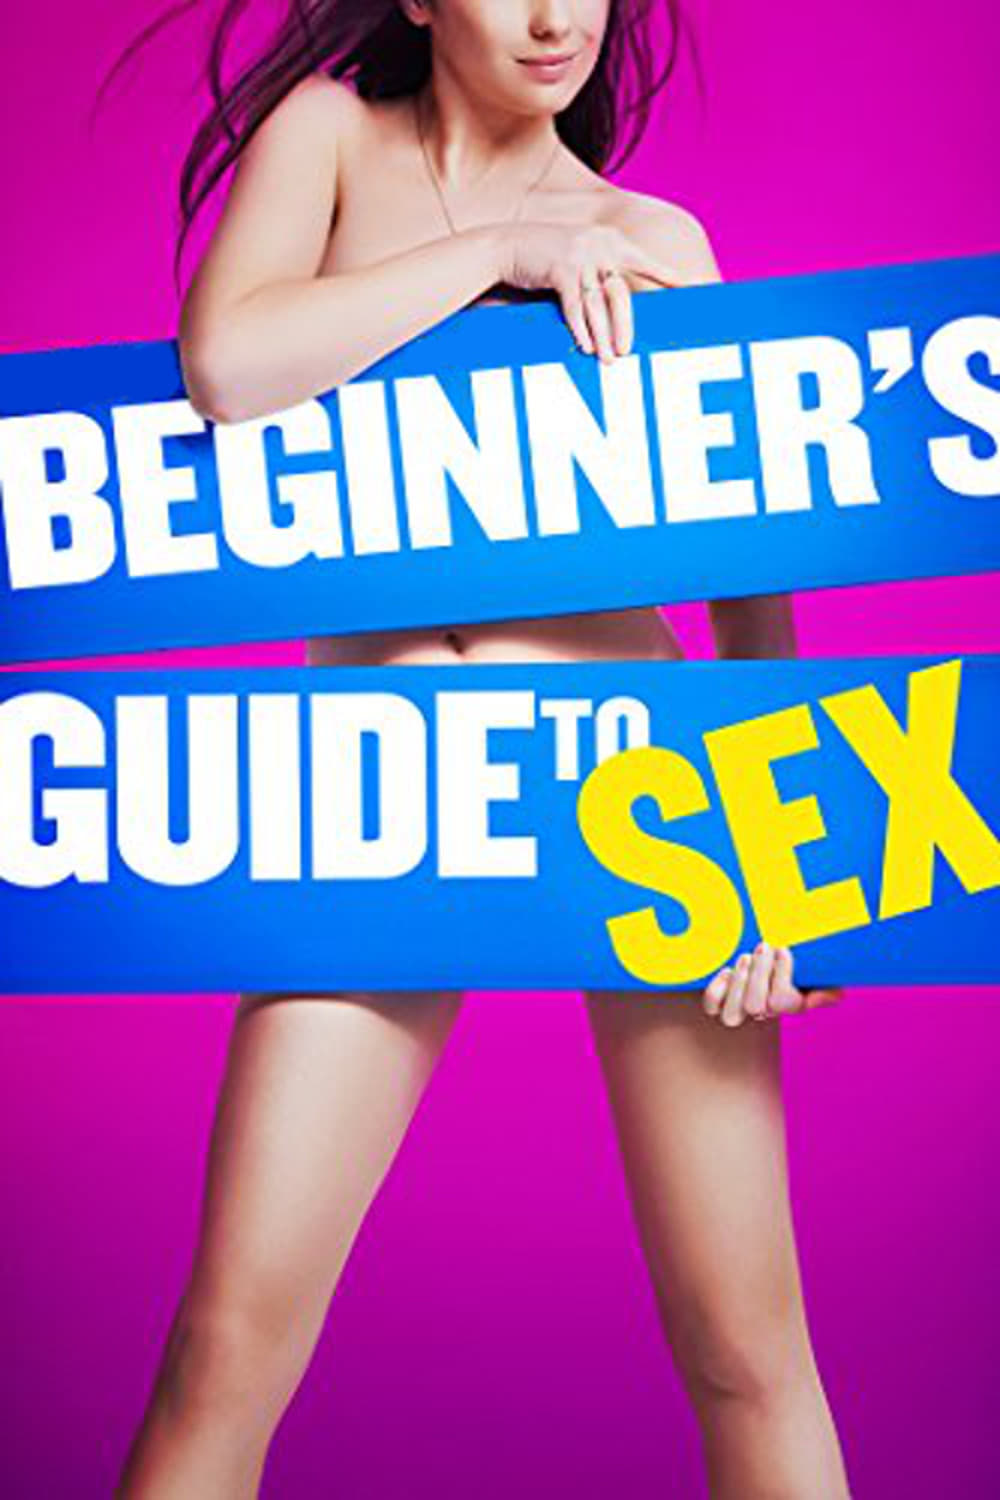 Beginner's Guide to Sex (2015)